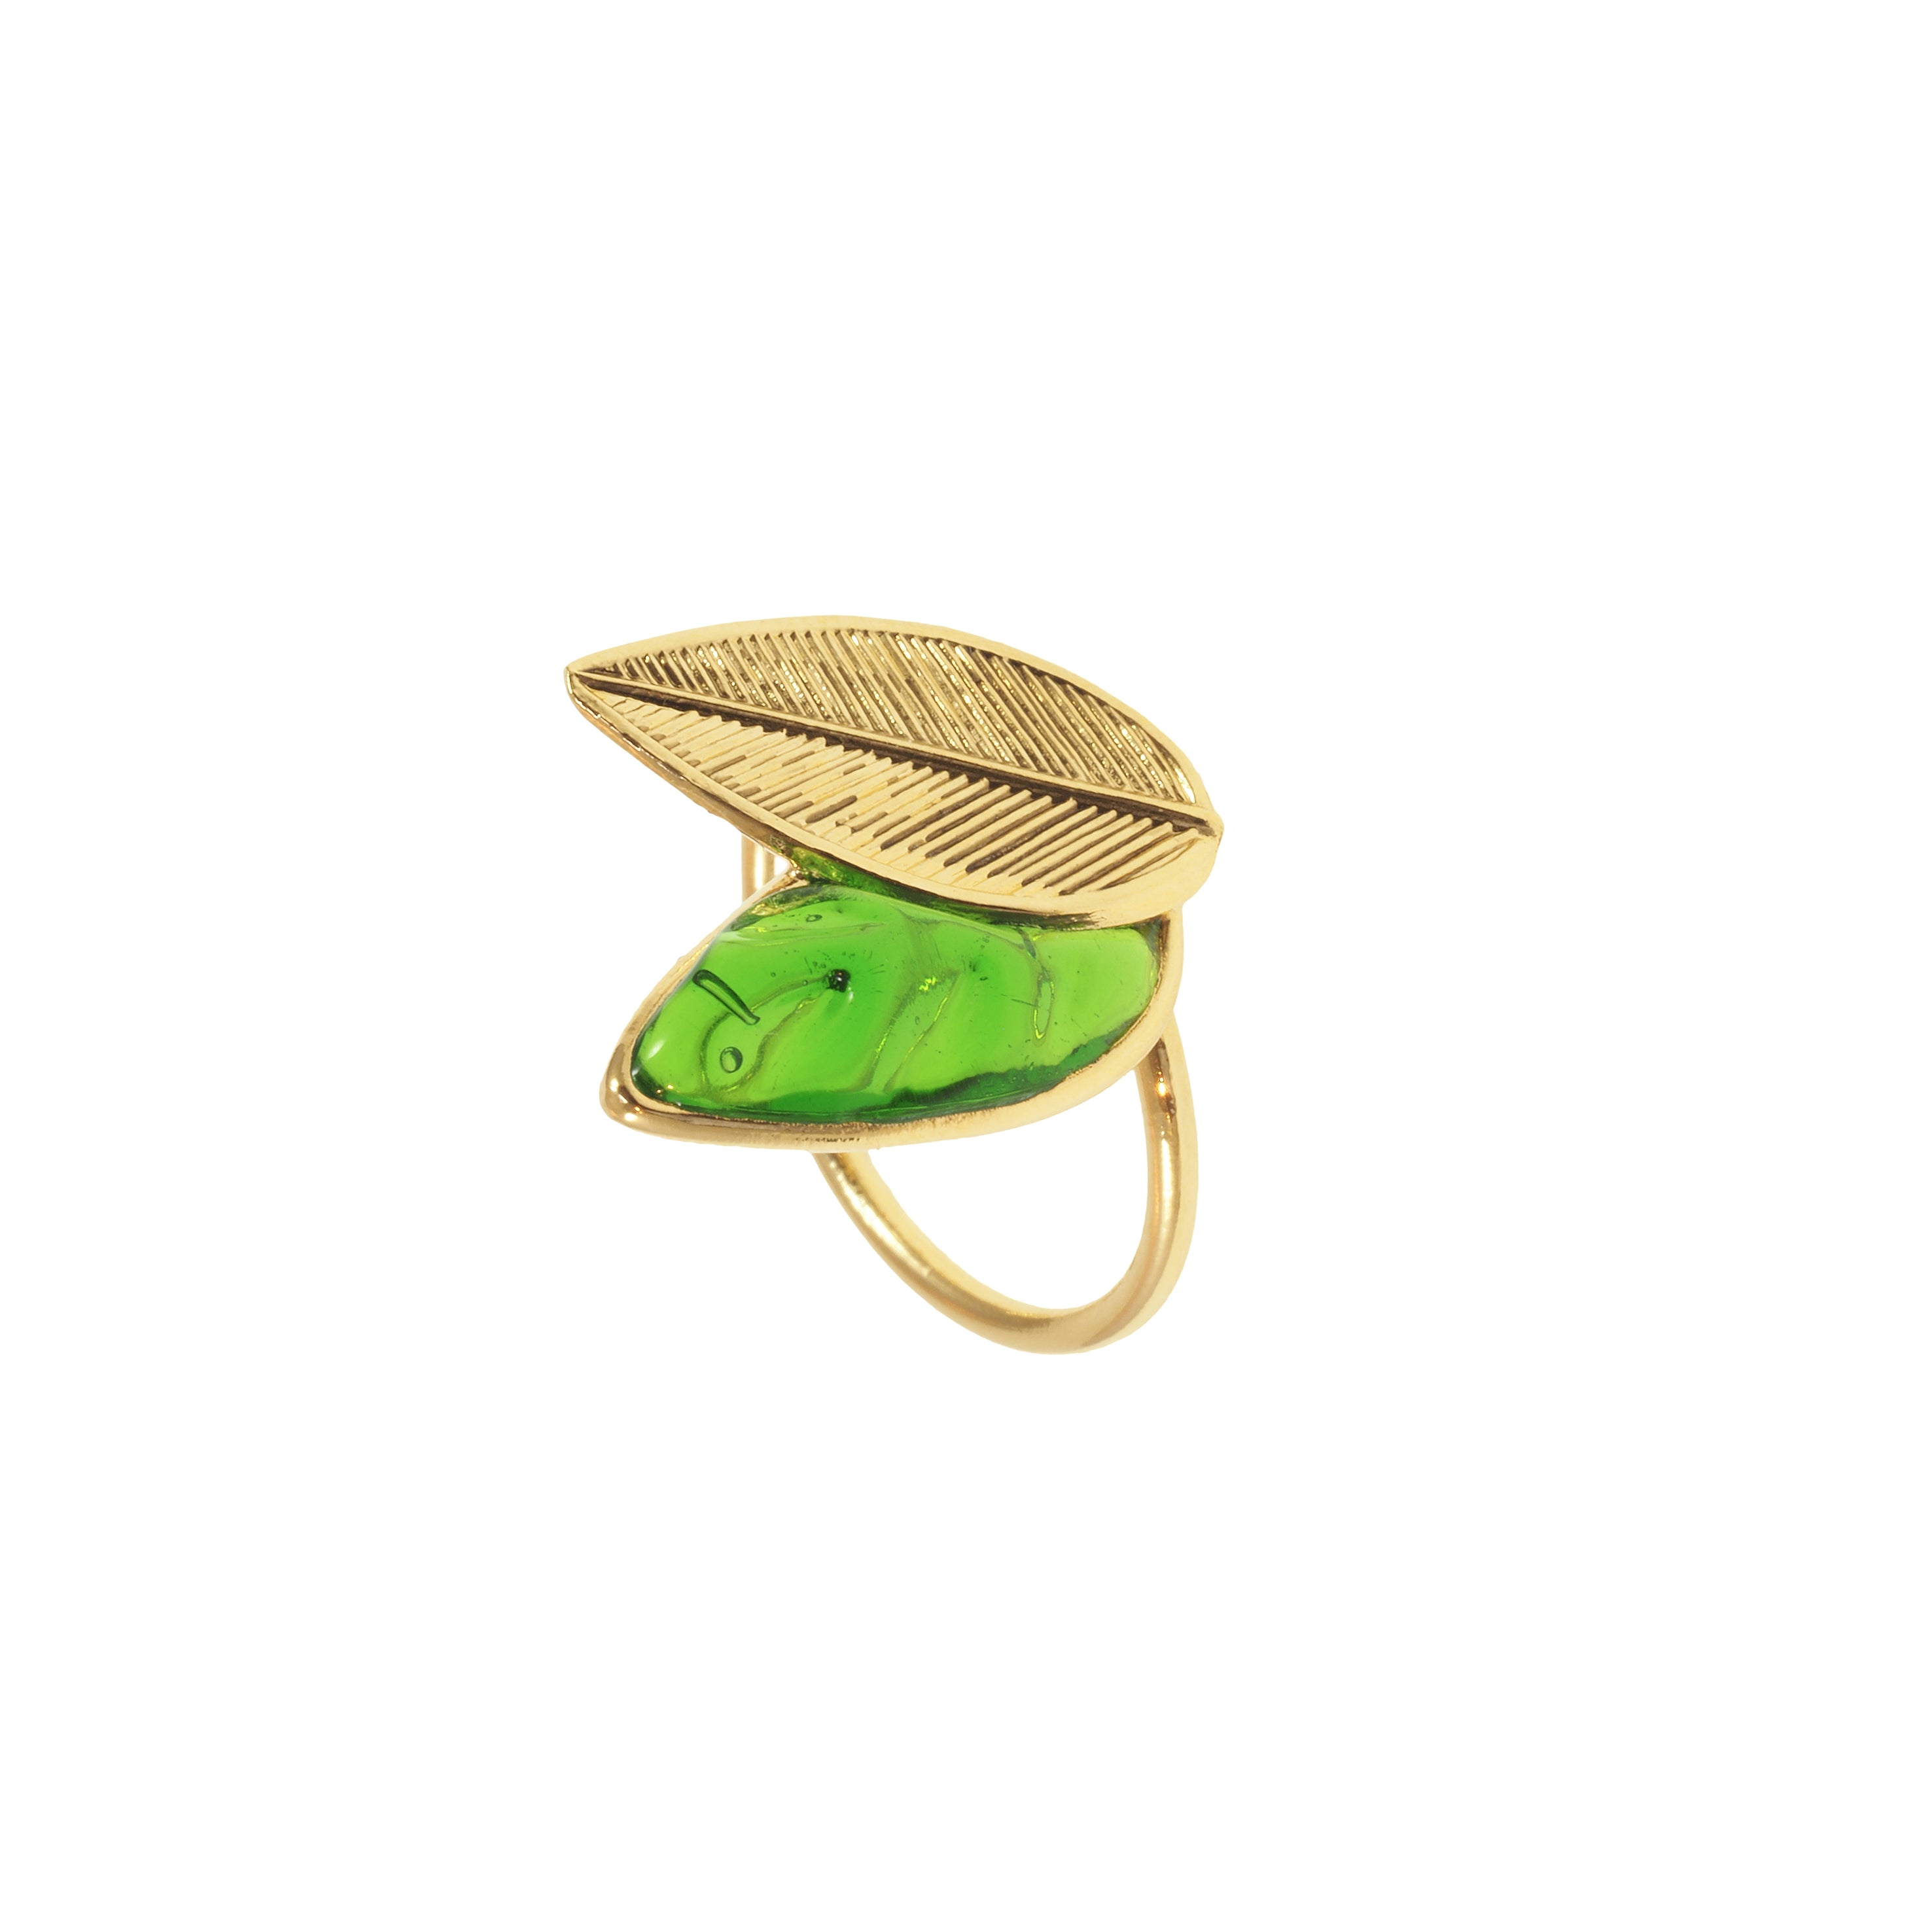 ﻿Under the Palms Adjustable Ring